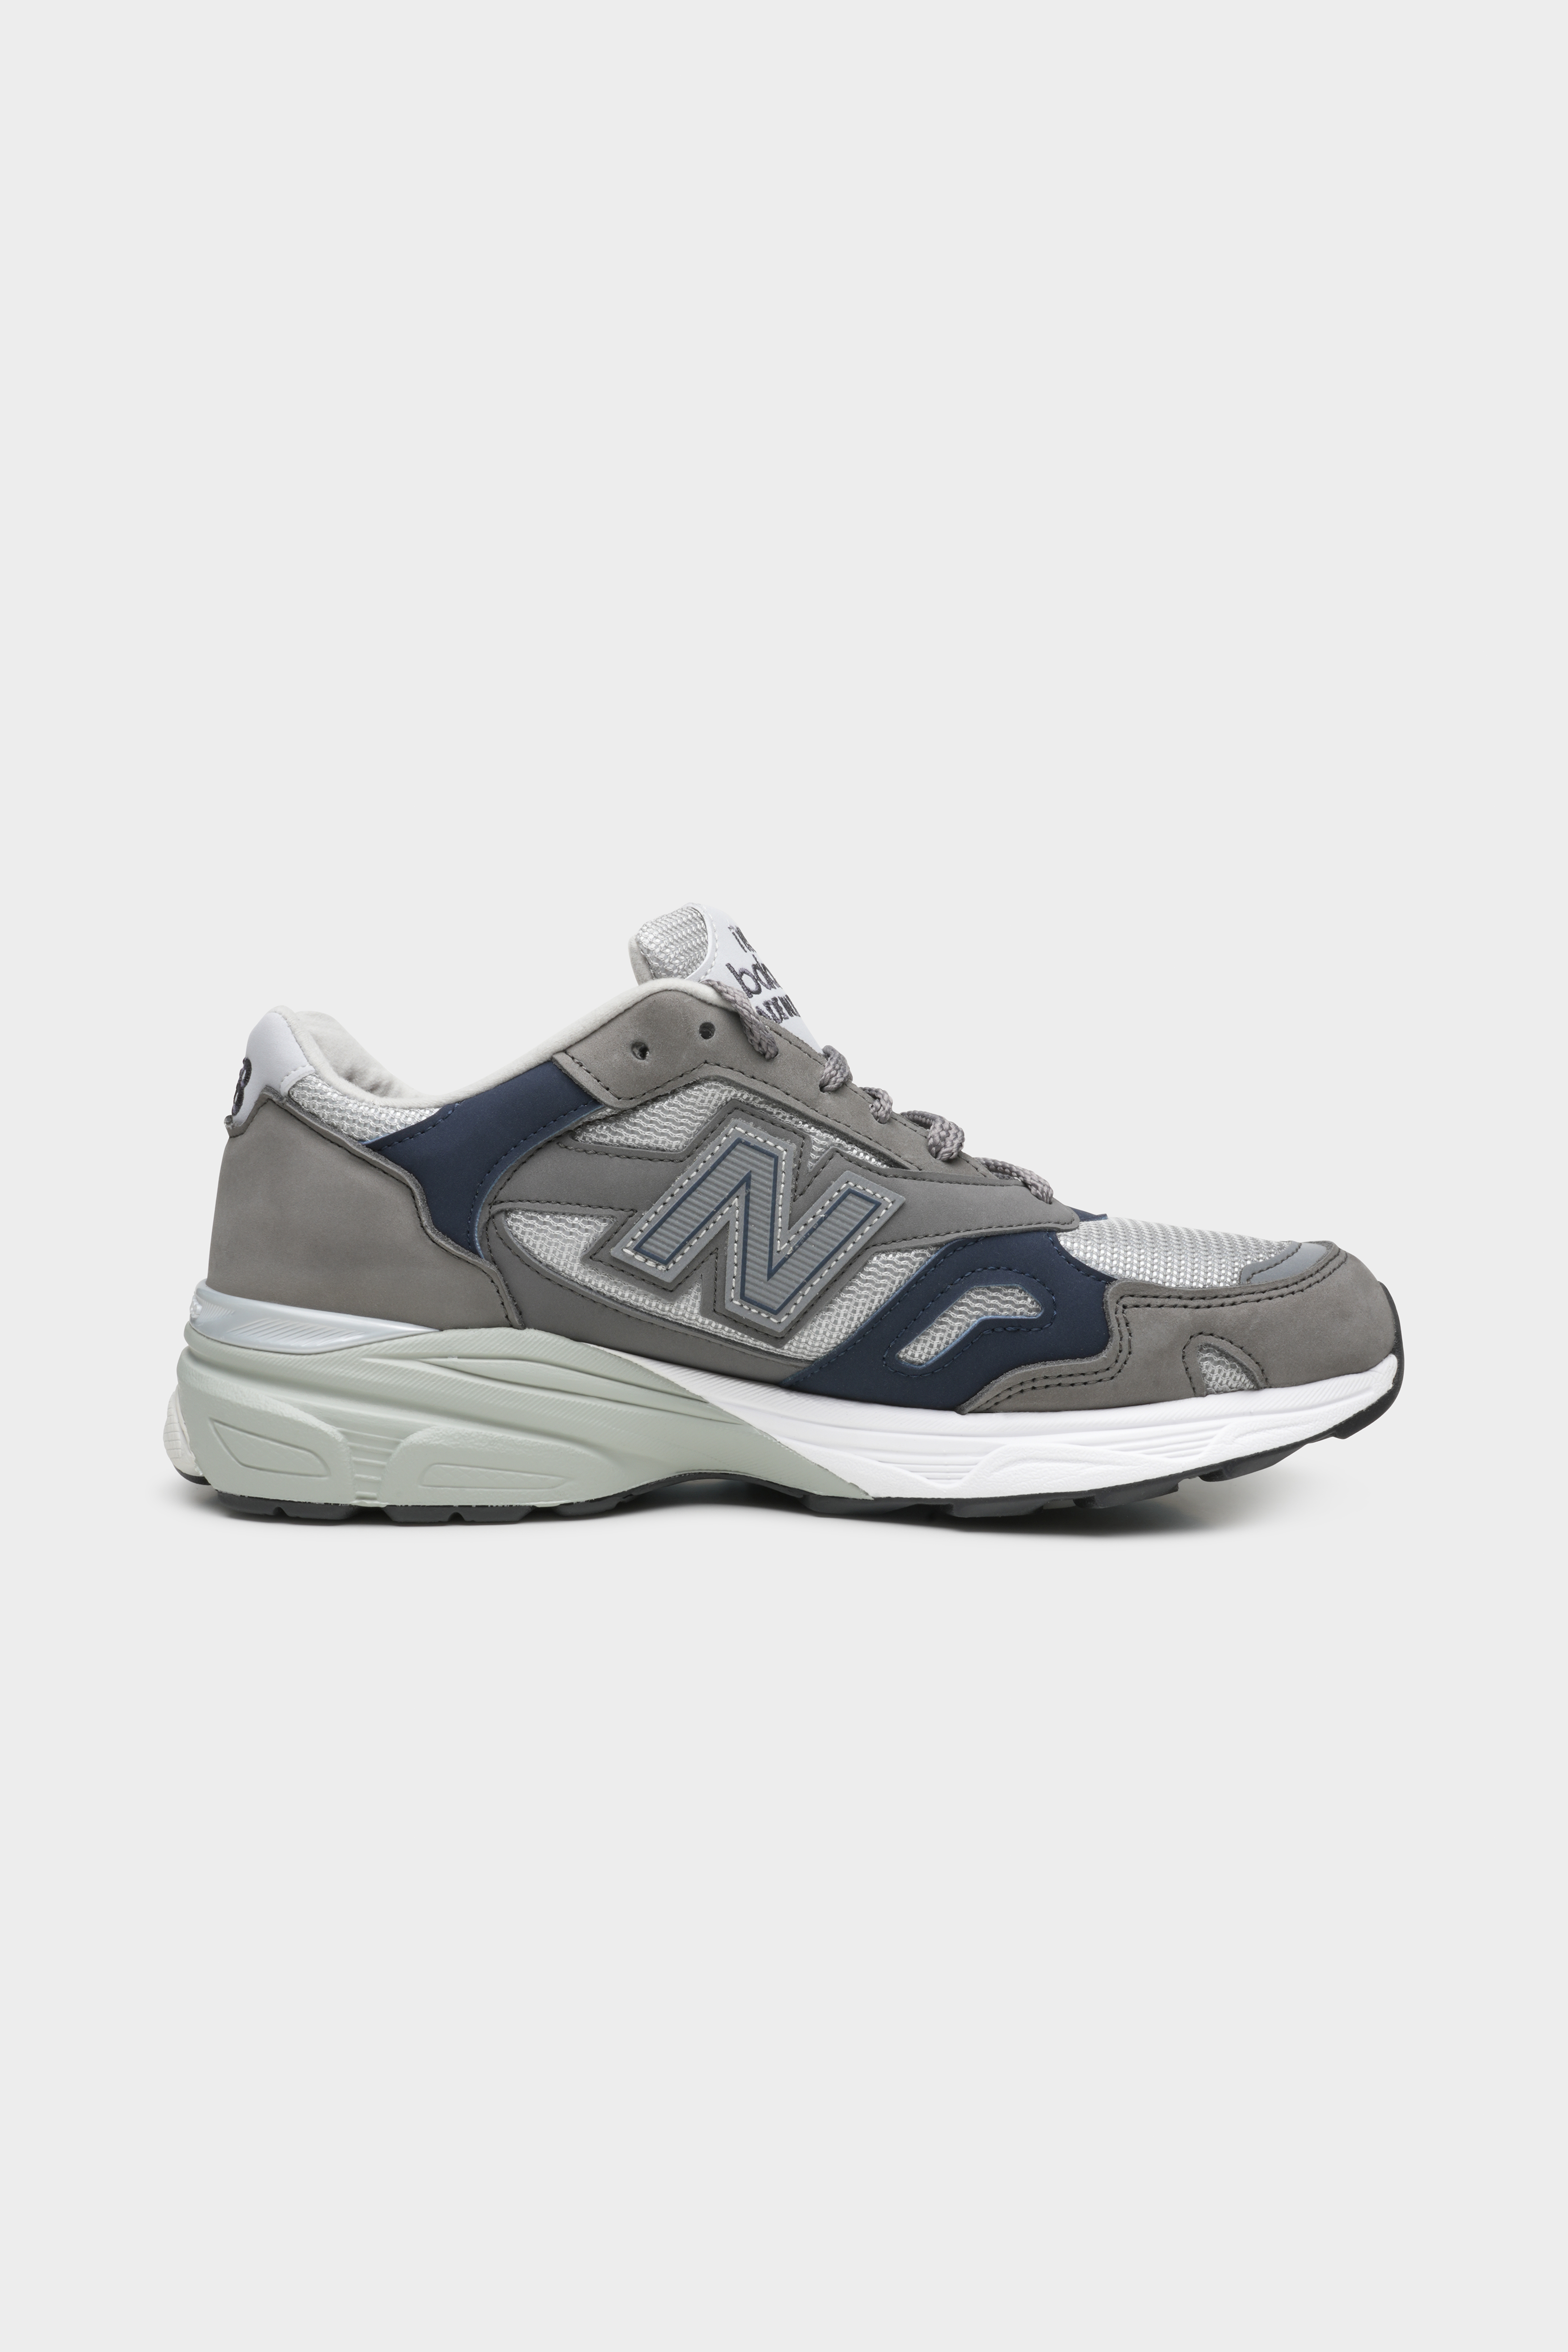 Selectshop FRAME - NEW BALANCE M920GNS "Made in England "Grey Navy" Footwear Concept Store Dubai